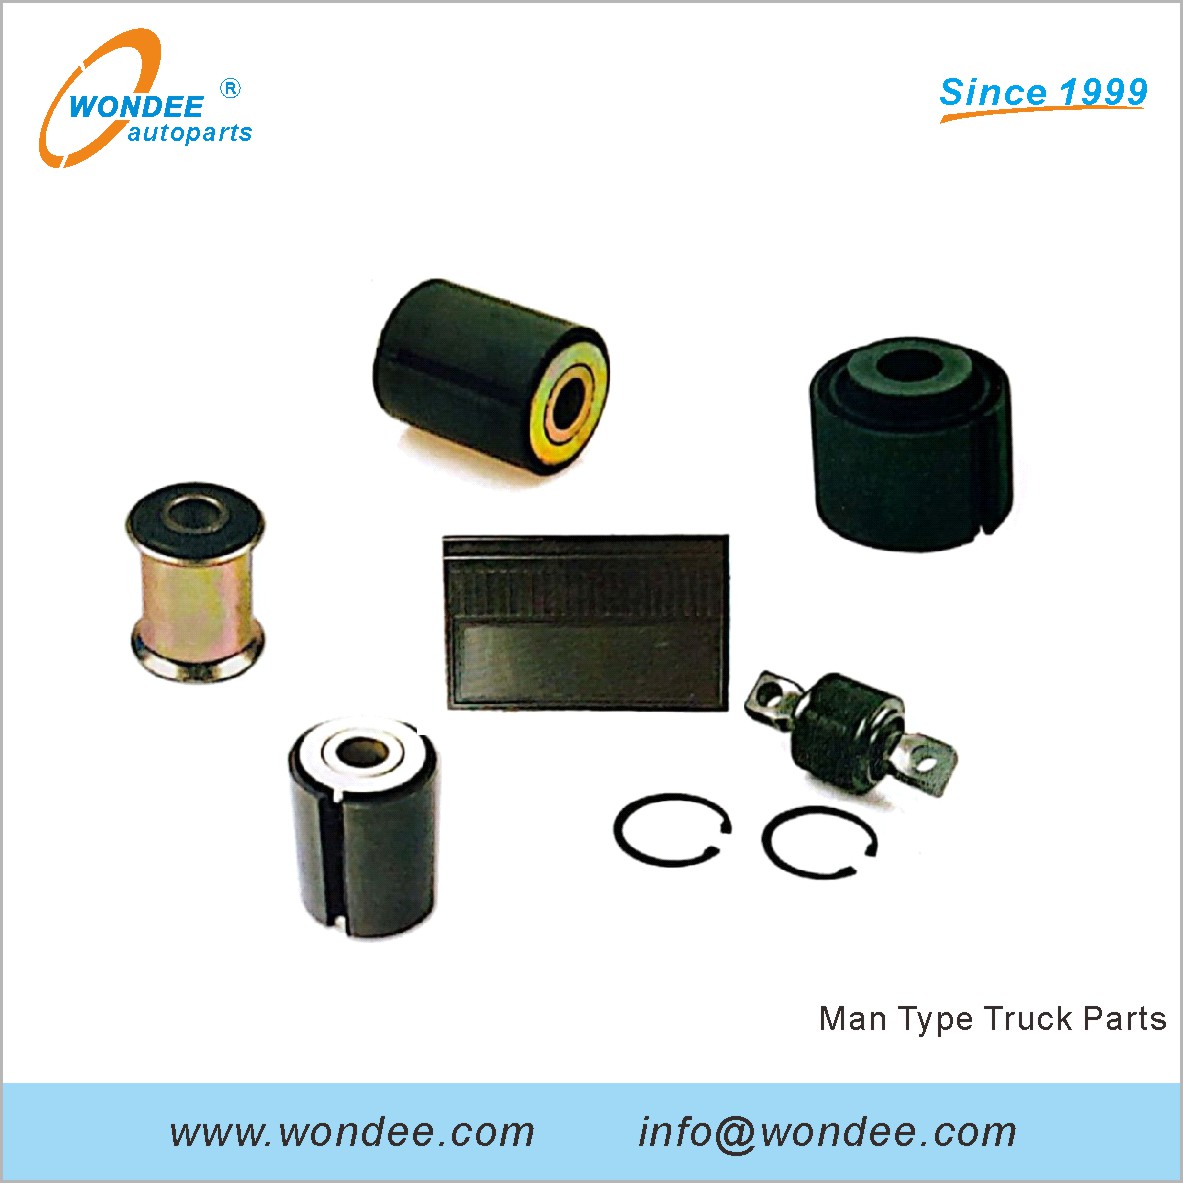 Man Type Rubber Bushing, Repair Kits, Stabilizer Mounting, Cabin Mounting for Truck